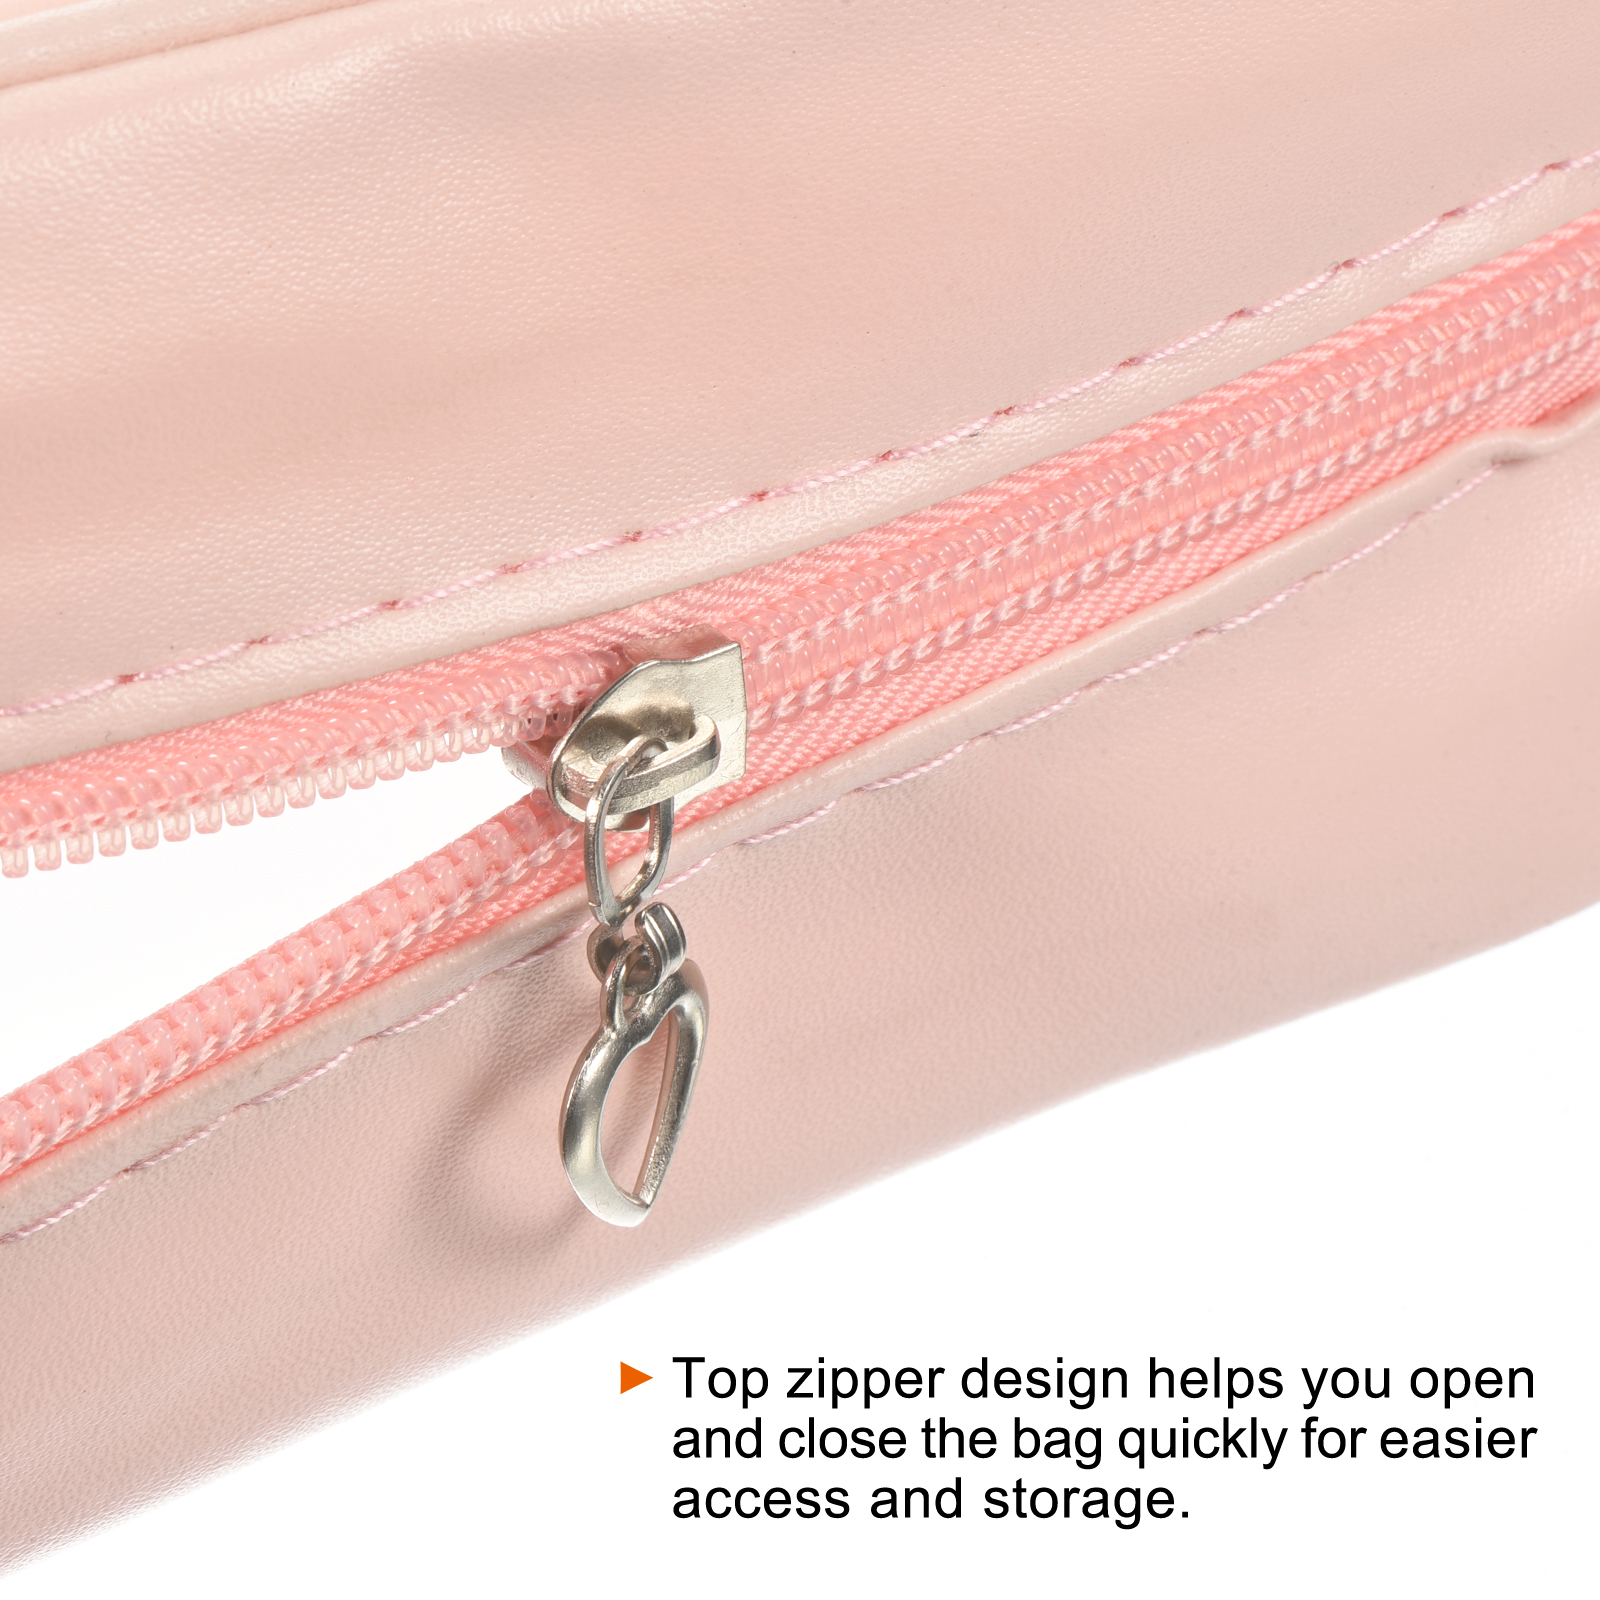 Uxcell 5.9"x9.8"x3.7" PVC Clear Toiletry Bag Makeup Bags with Zipper Handle Pink 3 Pack - image 5 of 5